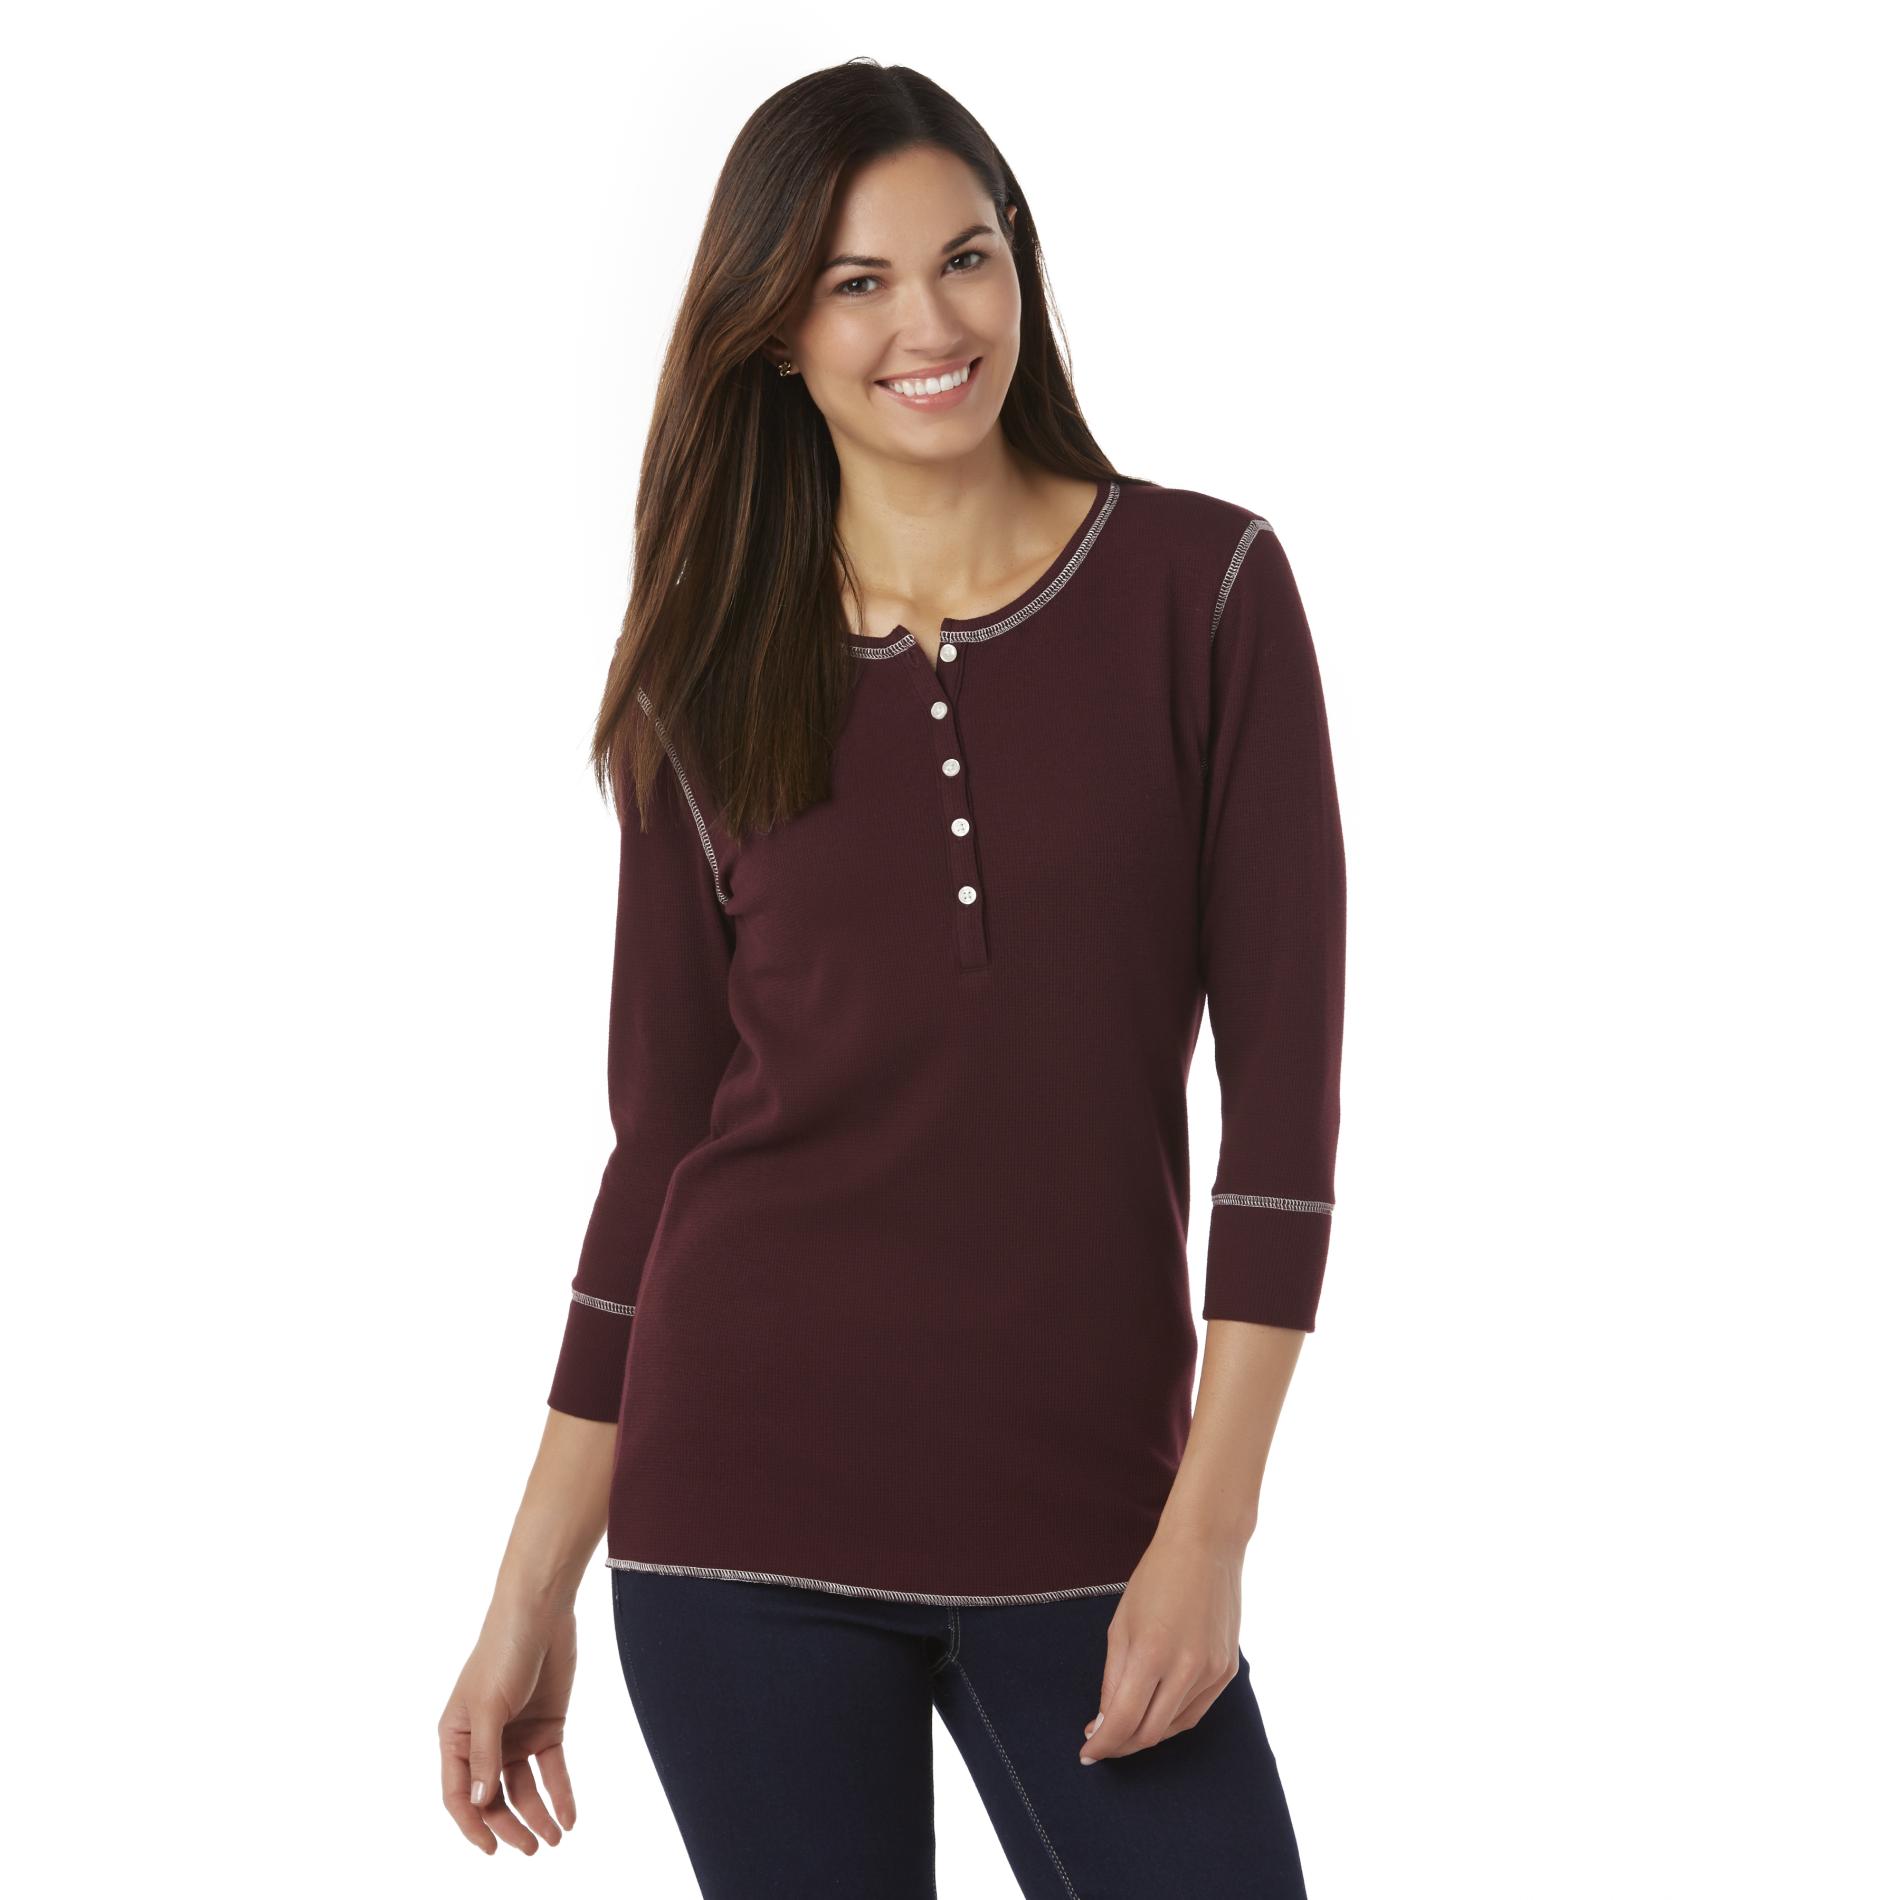 Route 66 Women's Thermal Henley Shirt